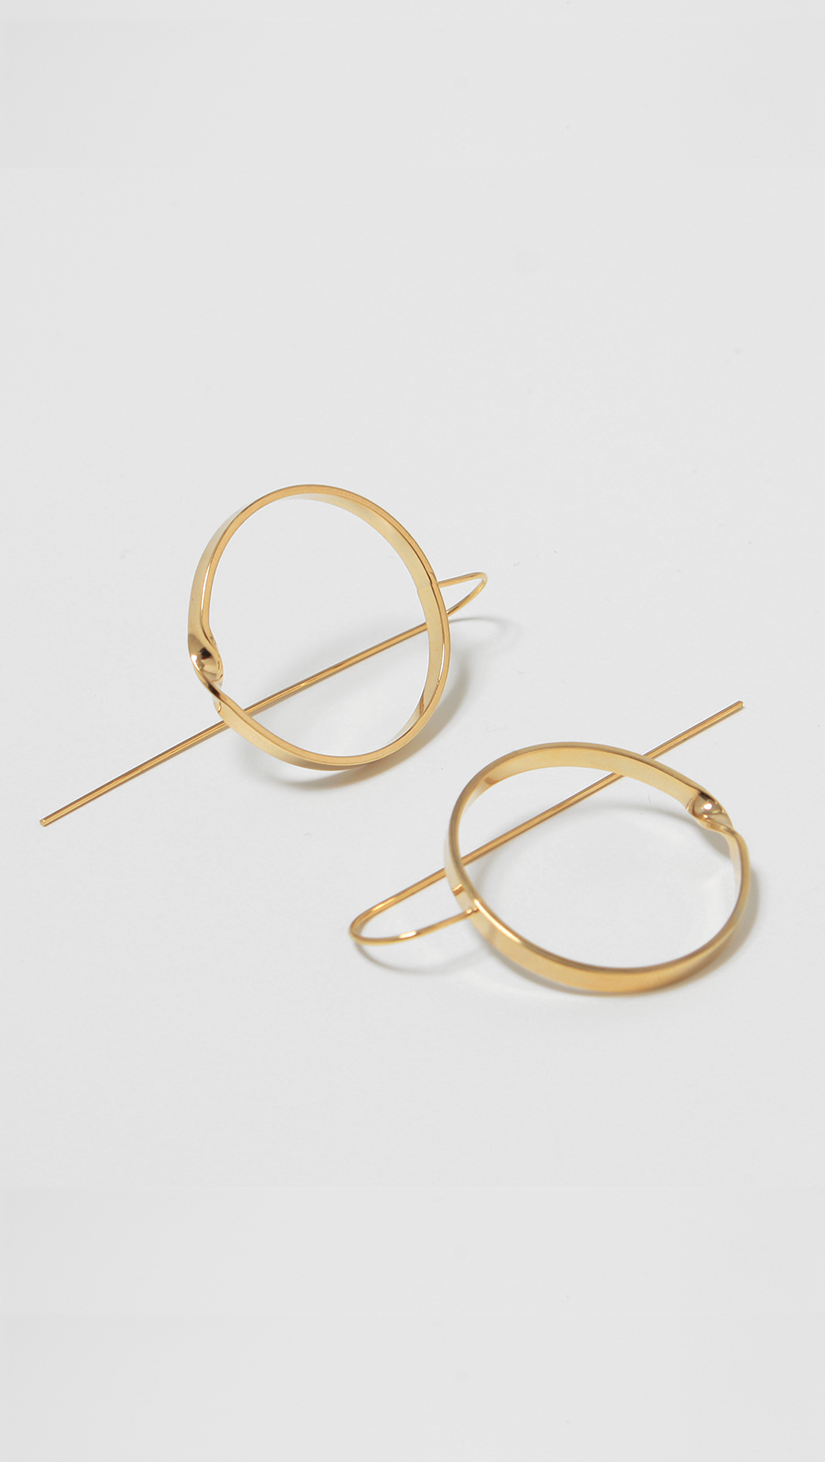 The Le Hen Circle Earring for a feminine, delicate style is crafted with a fine drop bar and finished with a large circle pendant. 